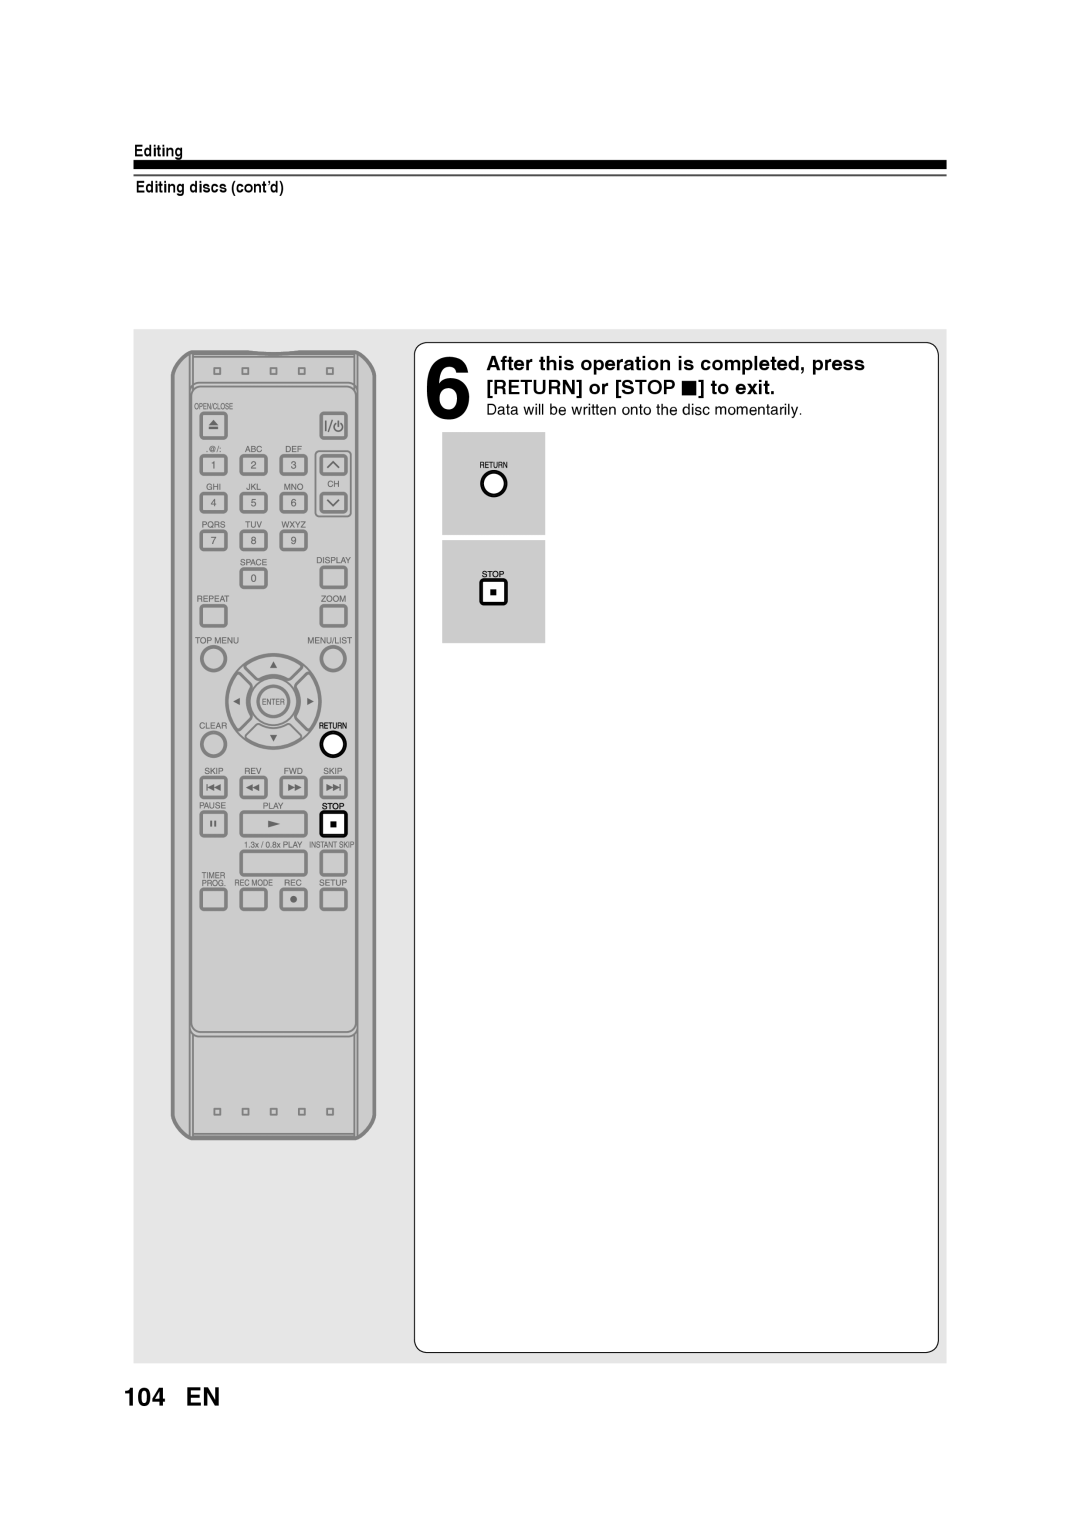 Toshiba D-RW2SU/D-RW2SC manual 104 EN, After this operation is completed, press RETURN or STOP C to exit 